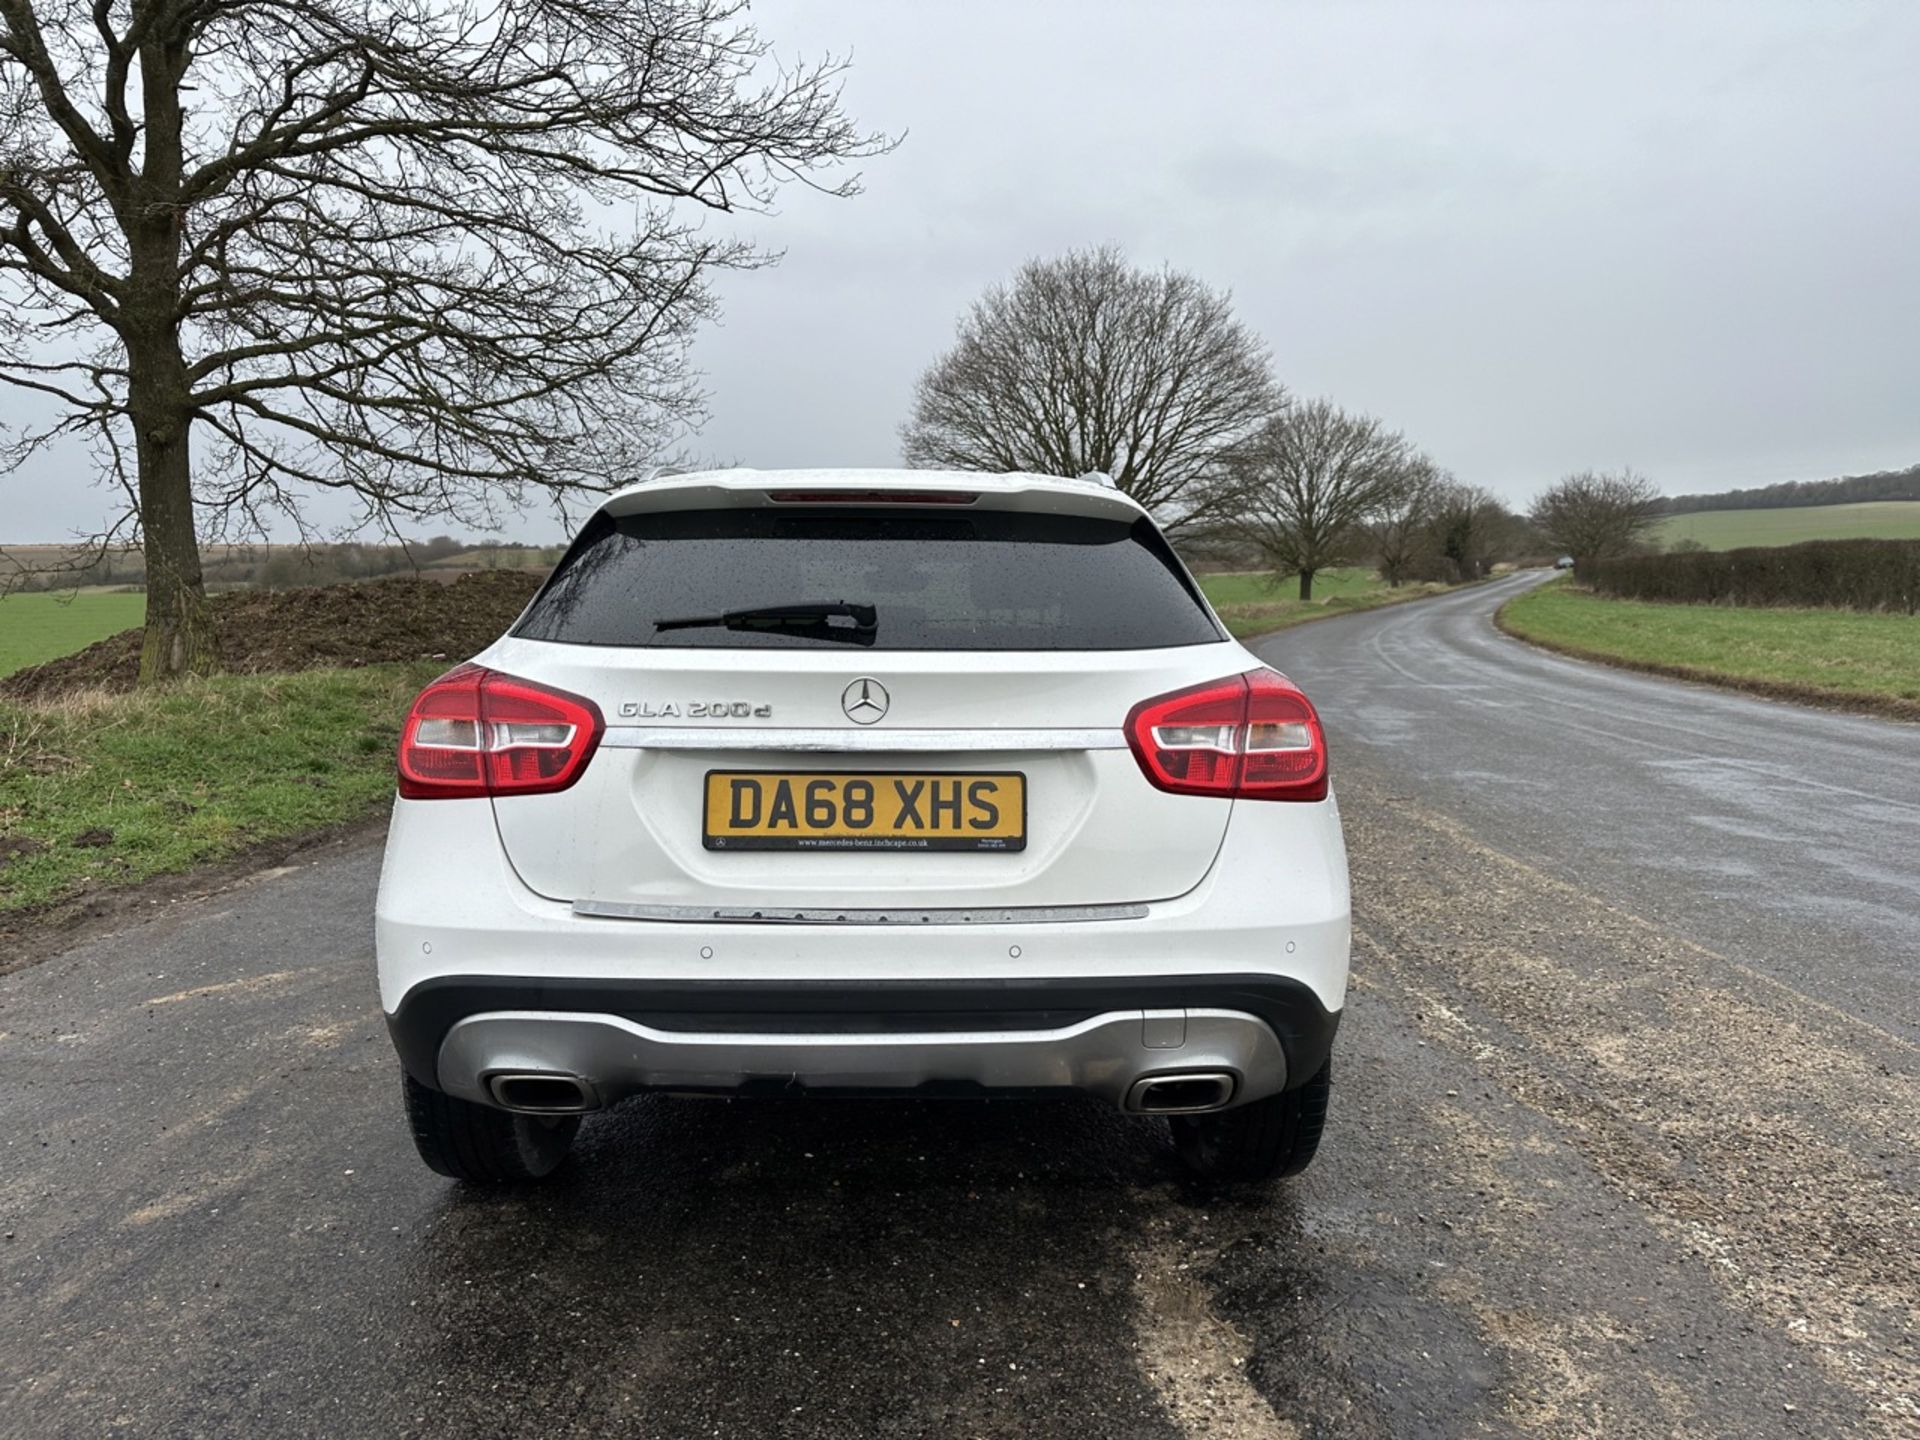 MERCEDES GLA 200d AUTO "SPORT EXECUTIVE" 2019 MODEL - LEATHER - LOW MILES - AIR CON - Image 7 of 17